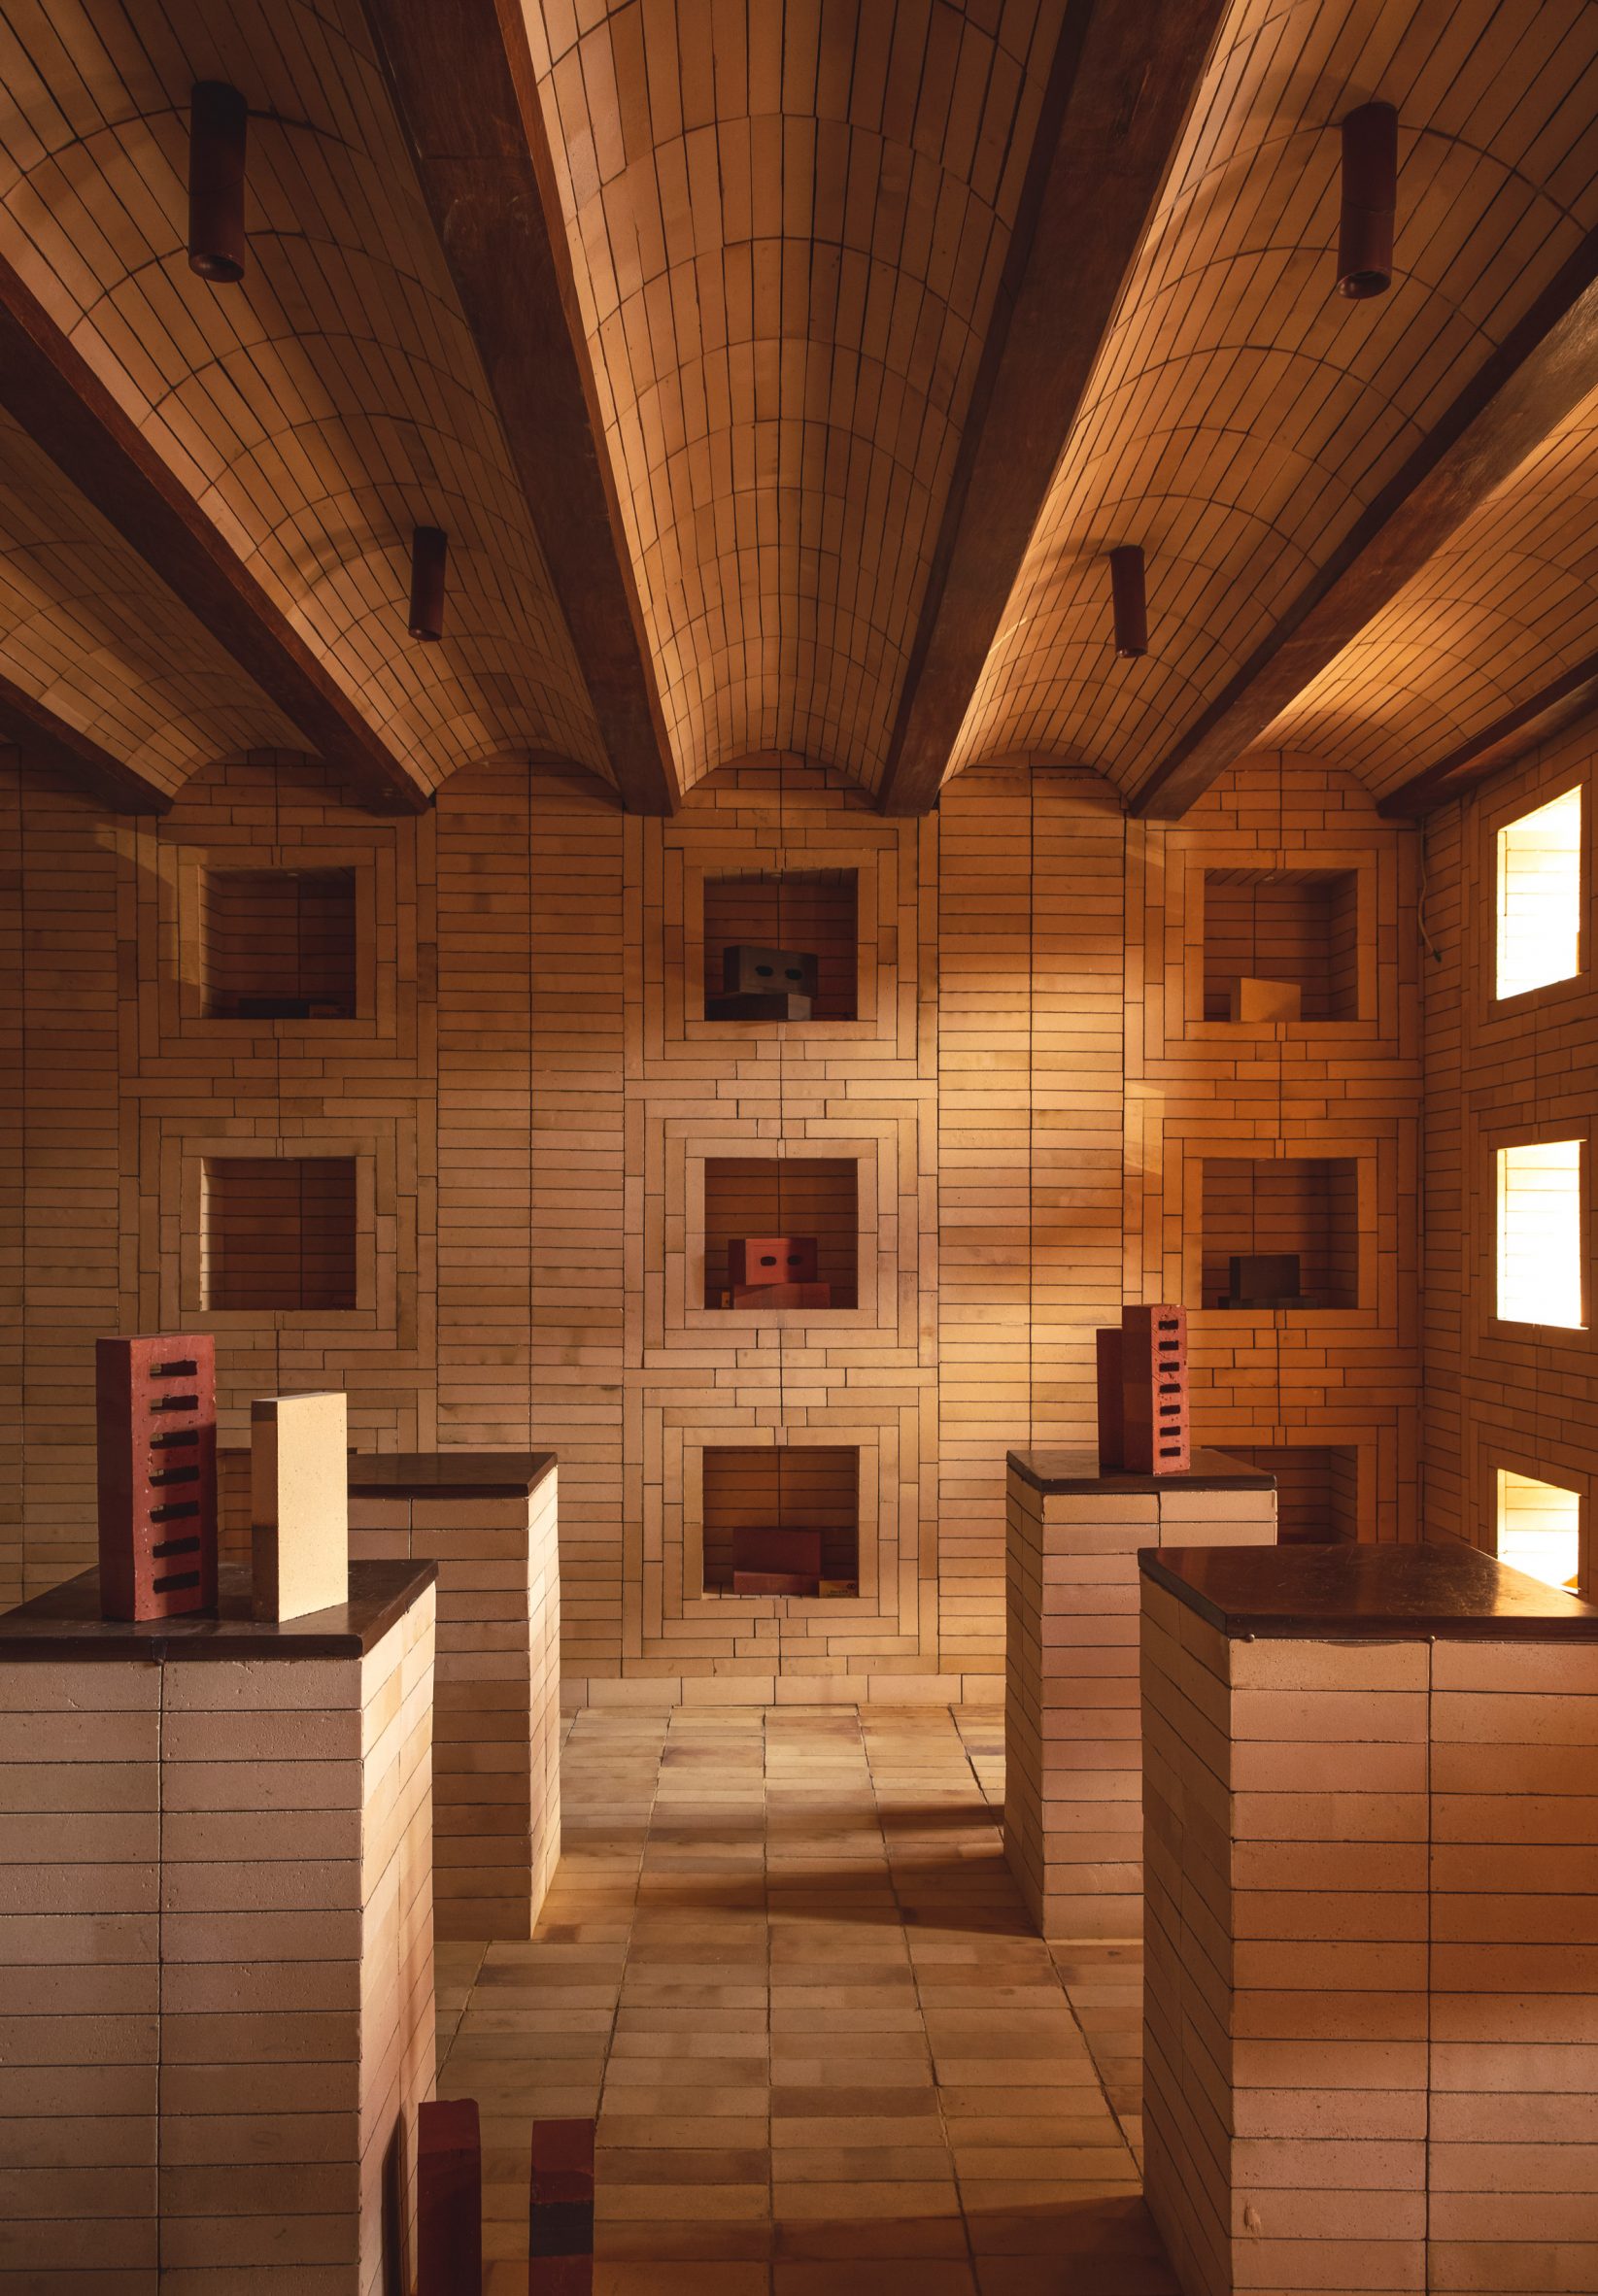  Indal Mechno Bricks displayed in square wall niches and on tall plinths made from bricks